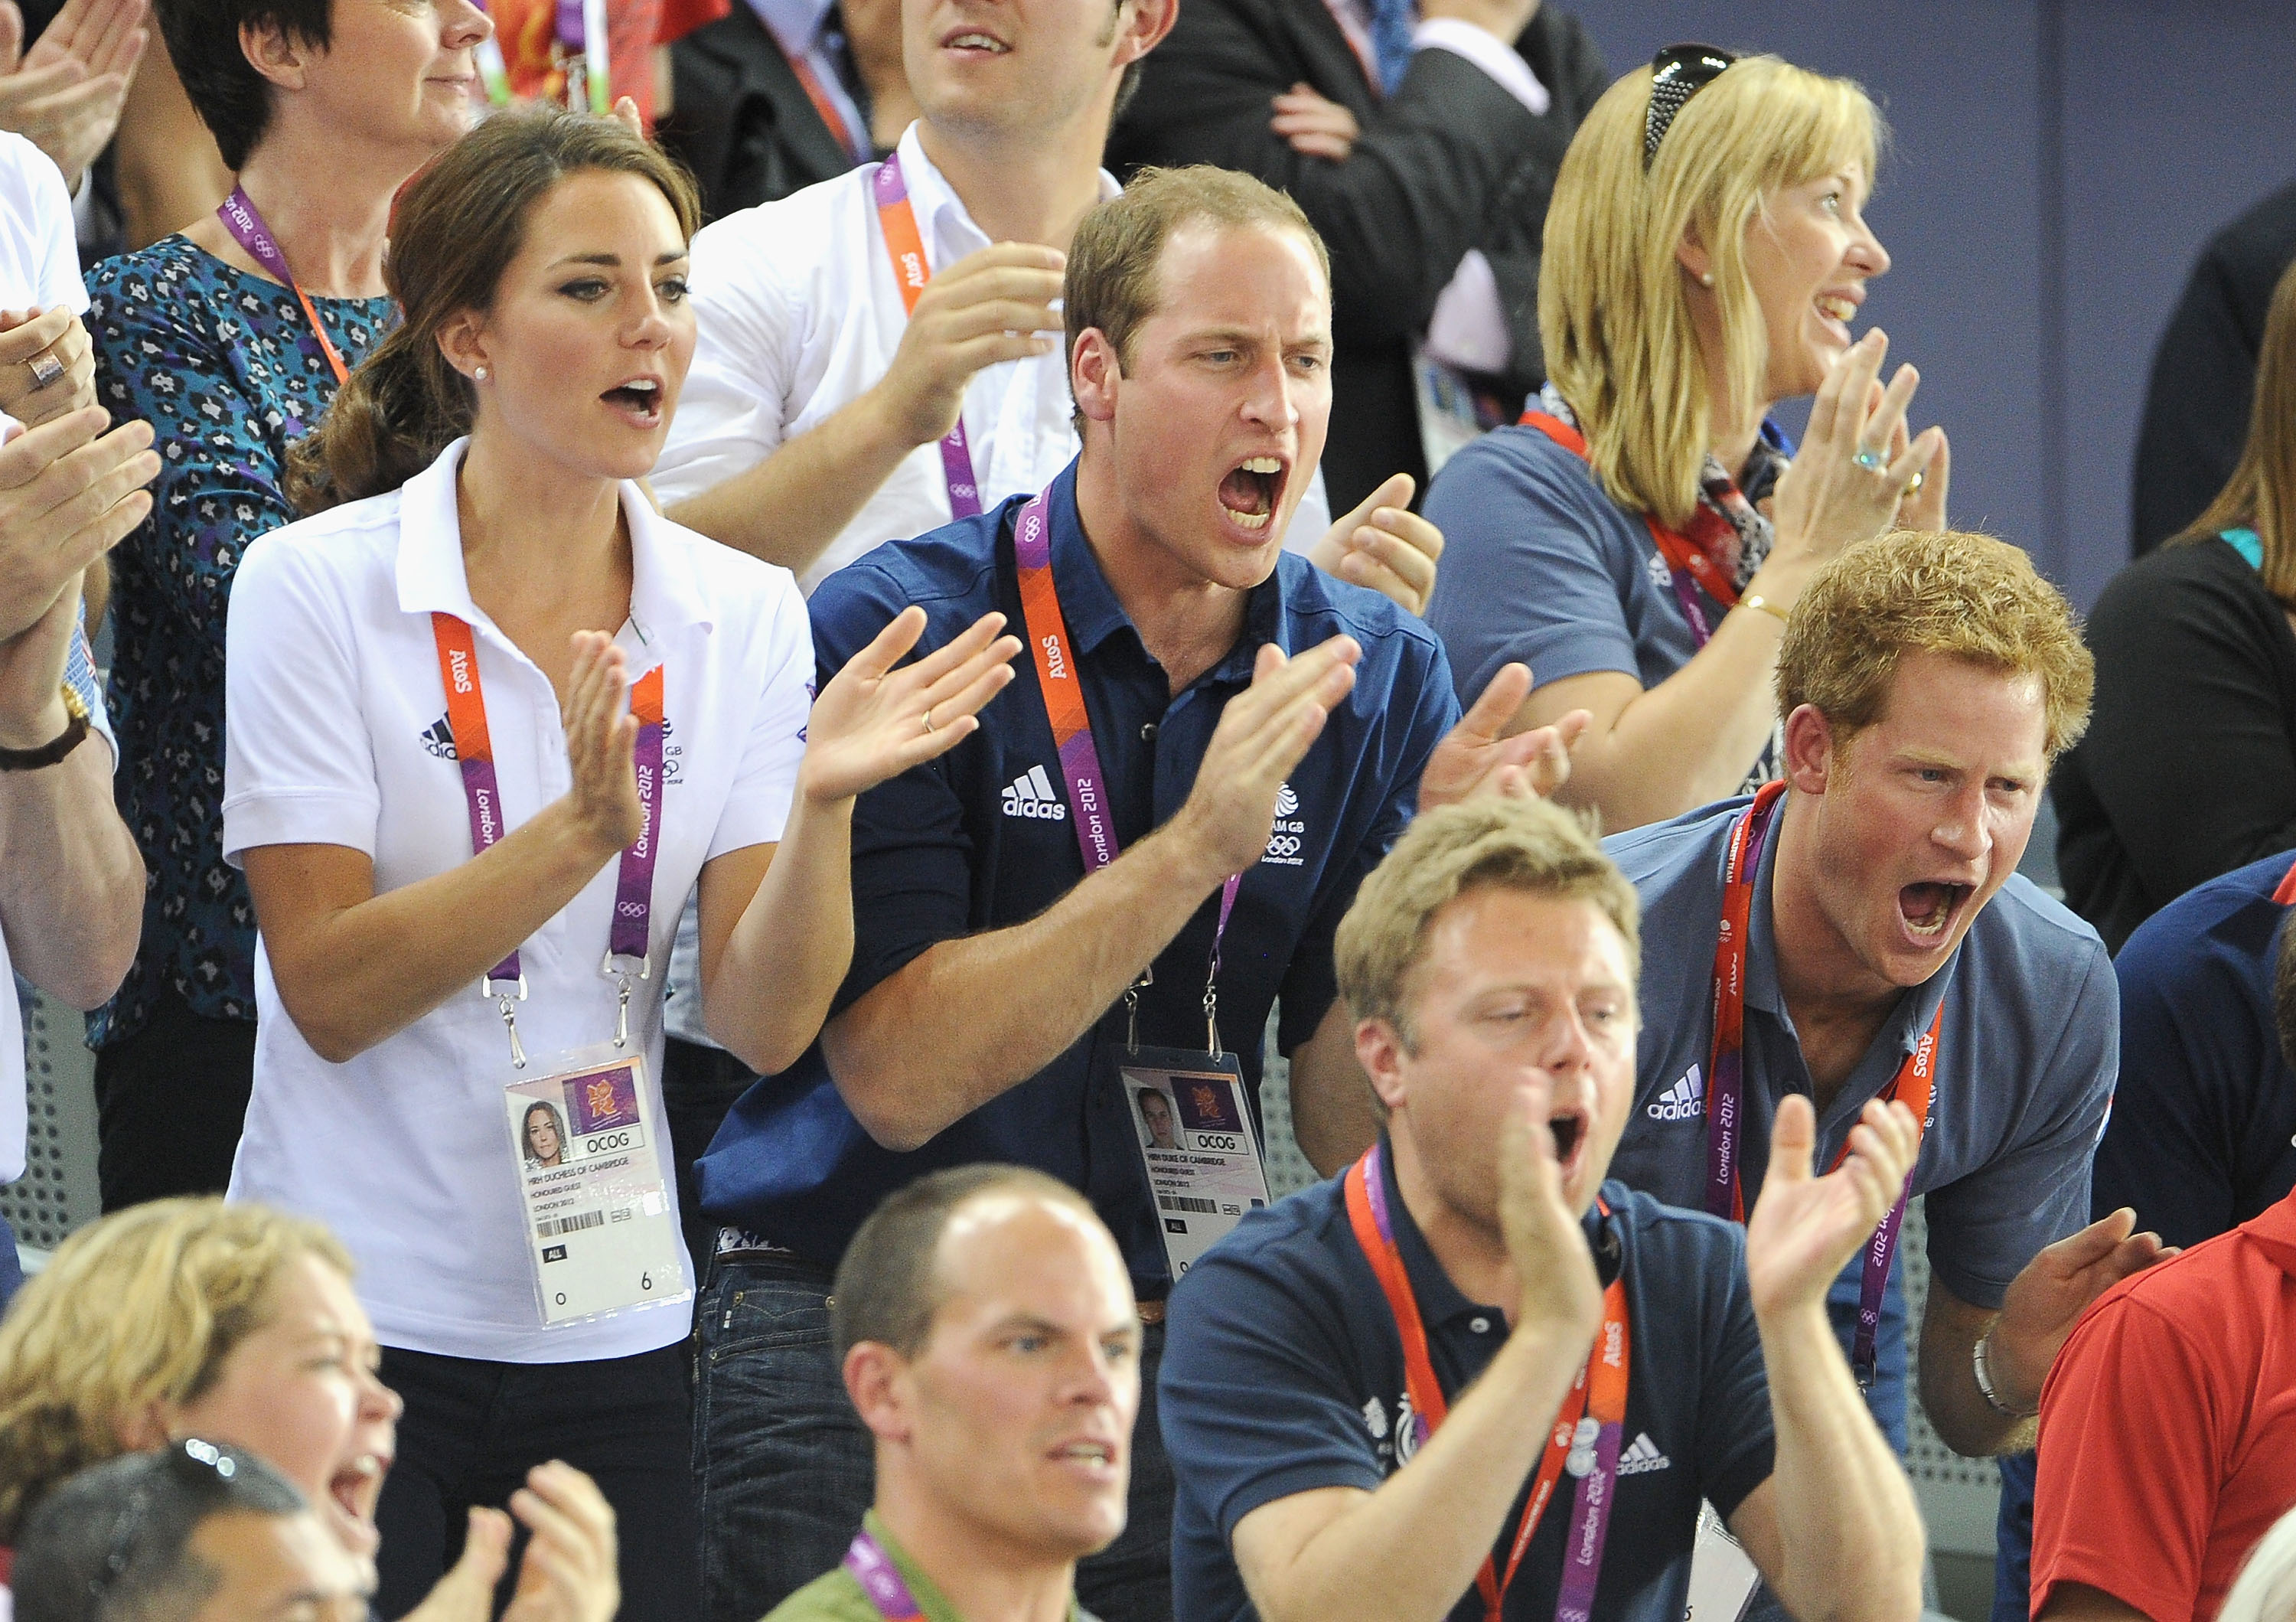 Catherine, Duchess of Cambridge, Prince William, Duke of Cambridge and Prince Harry during Day 6 of the London 2012 Olympic Games at Velodrome on August 2, 2012 in London, England. (Pascal Le Segretain—Getty Images)